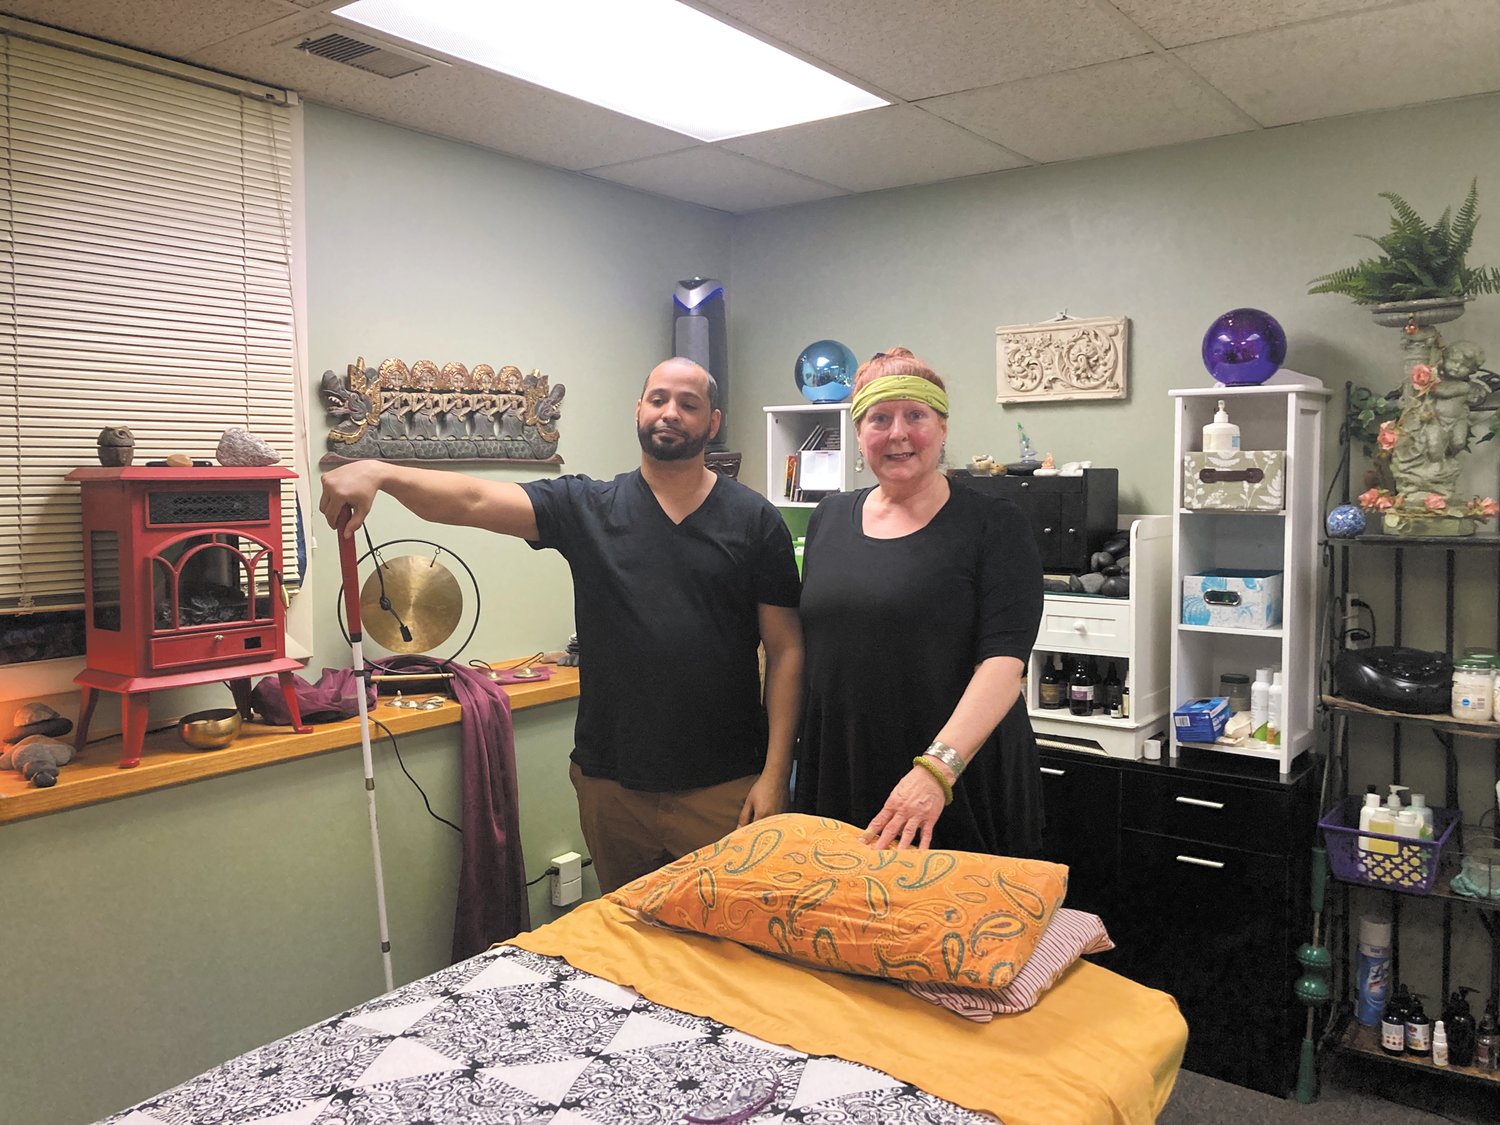 READY TO SERVE: JR is a licensed massage therapist and, while he is visually-impaired, he is looking forward to giving back to the community. With him is Cheryl D’Itri, owner of It’s Your Body’s Symphony.